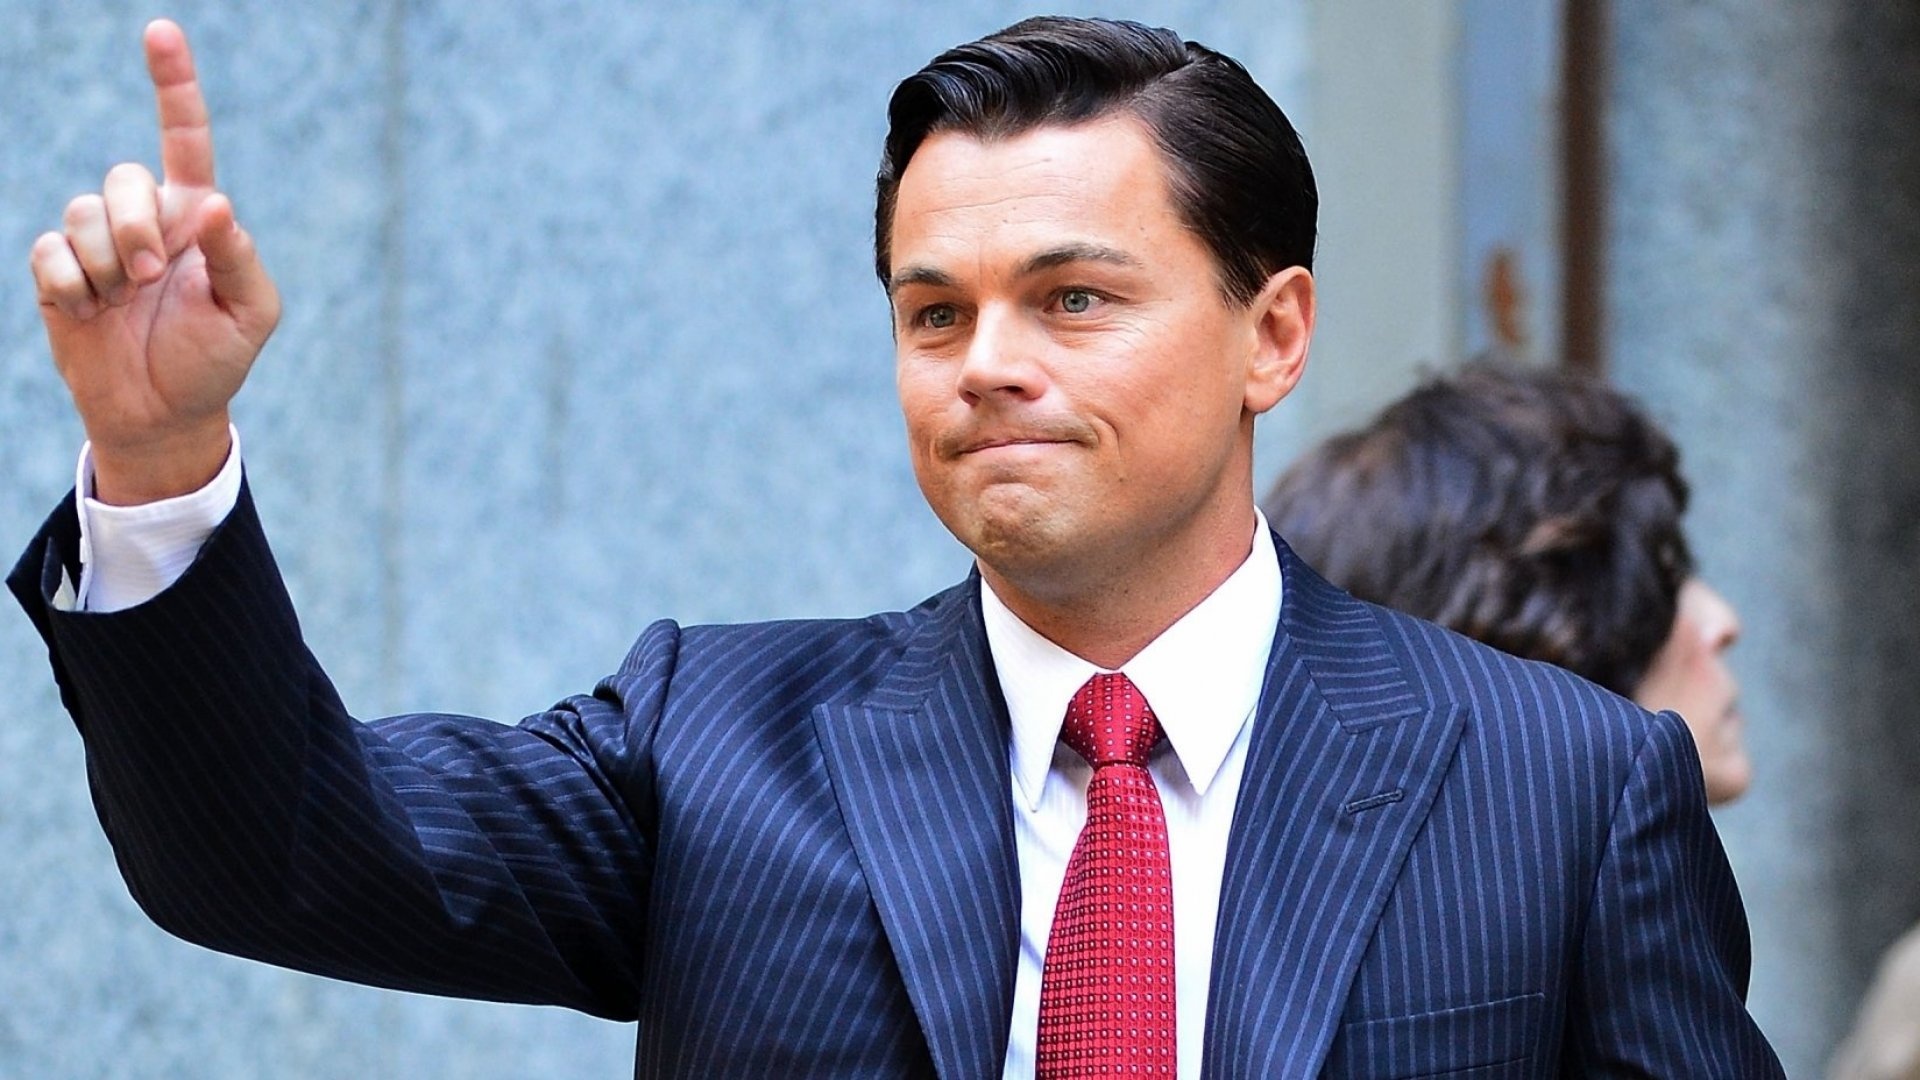 The Wolf of Wall Street: For his performance, DiCaprio received his fourth Oscar nomination, Actor. 1920x1080 Full HD Wallpaper.